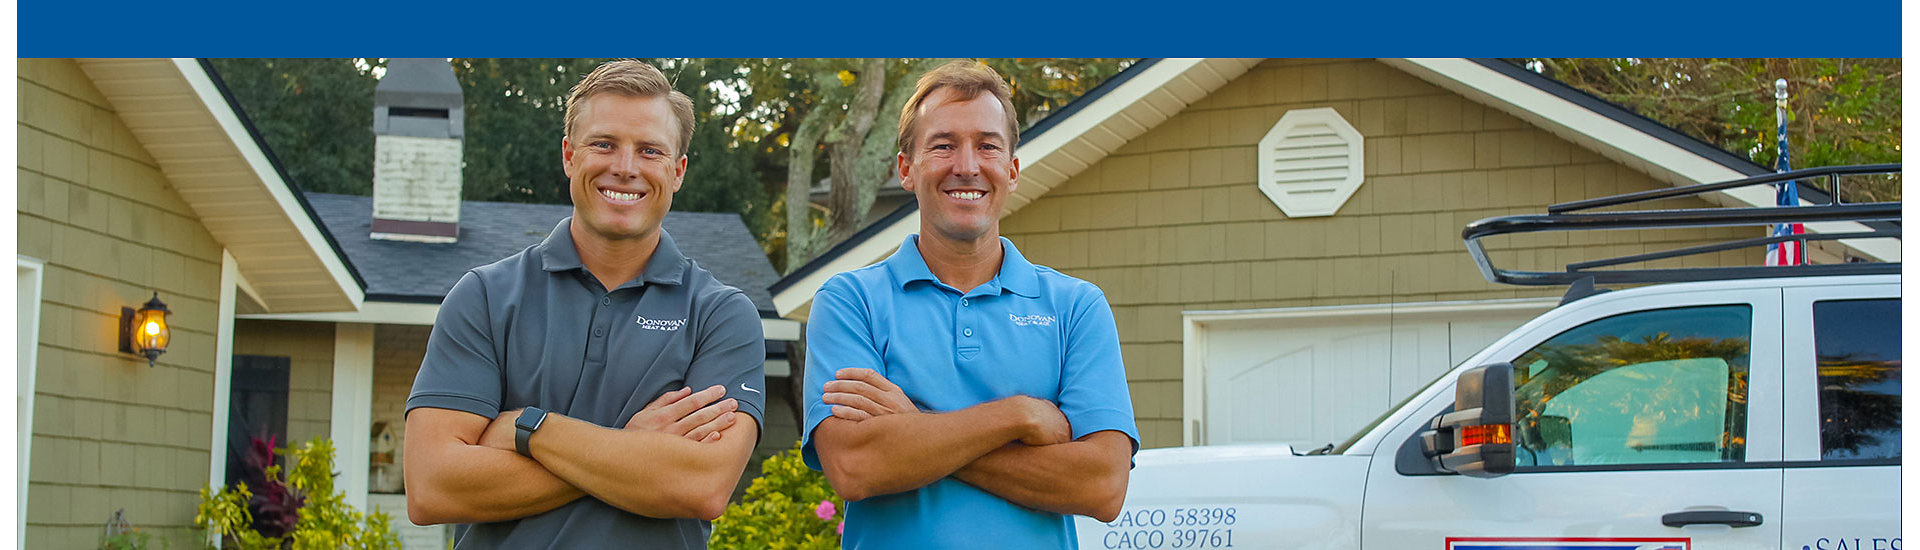 Two technicians smiling in driveway